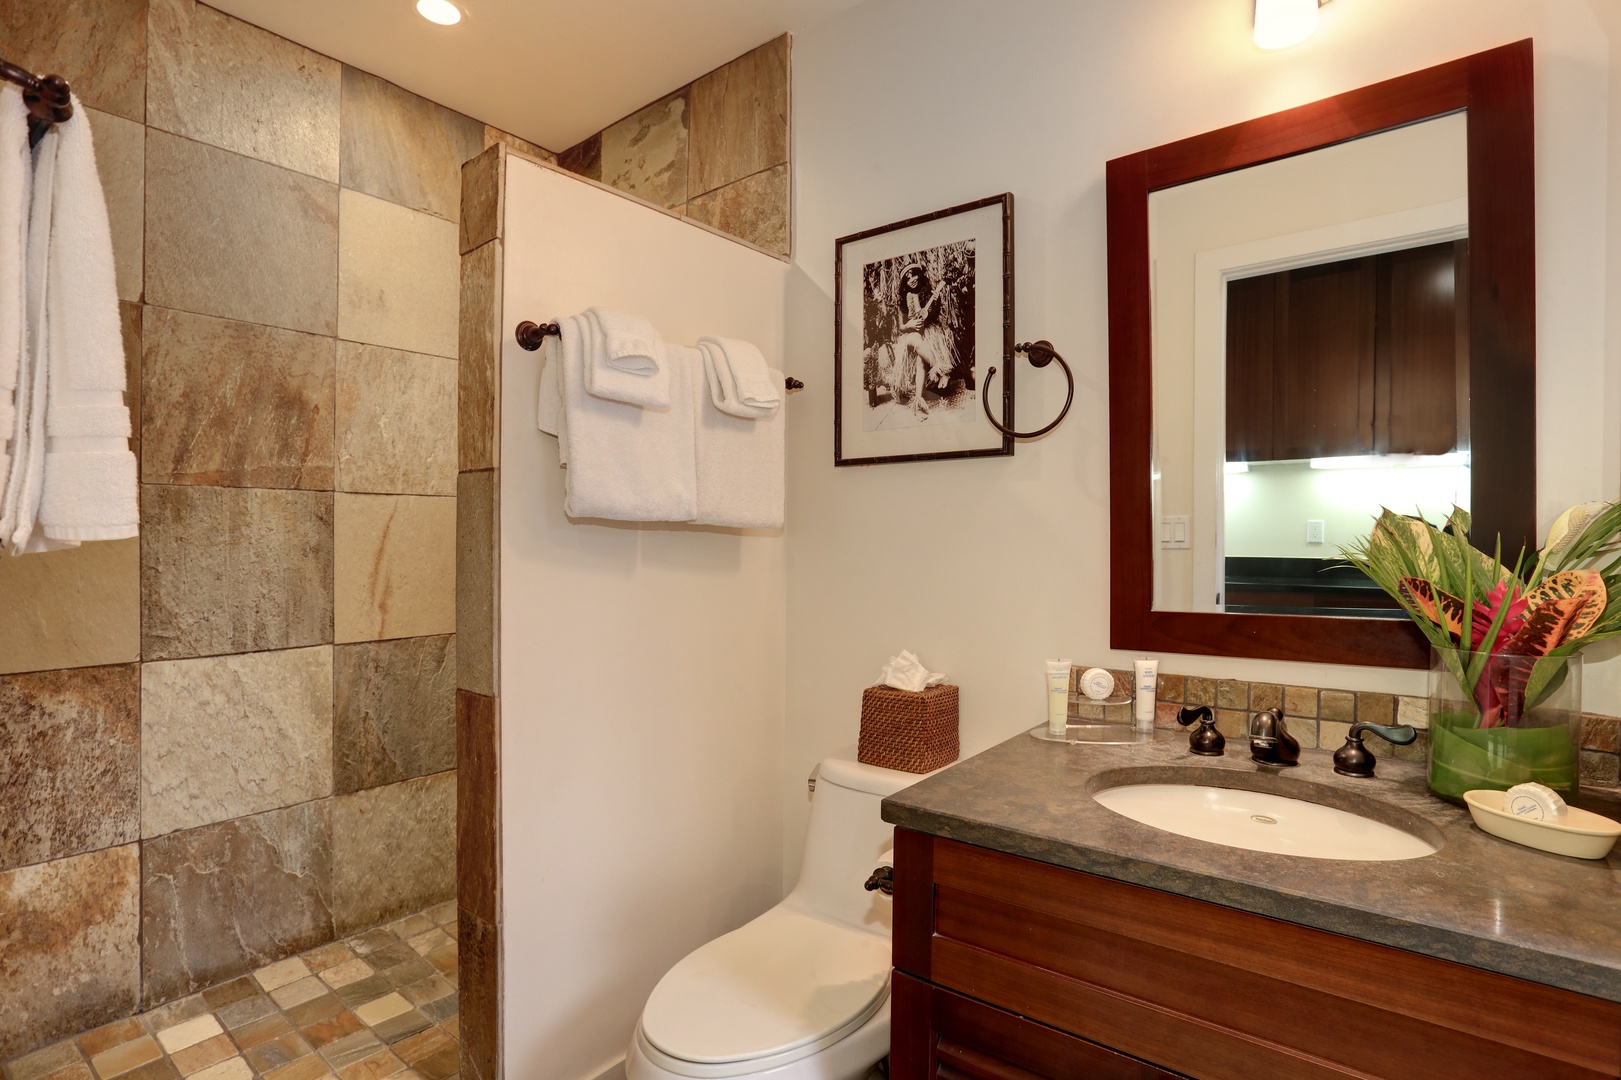 Lahaina Vacation Rentals, Aina Nalu B105 Studio - Large walk-in shower surrounded by natural stone